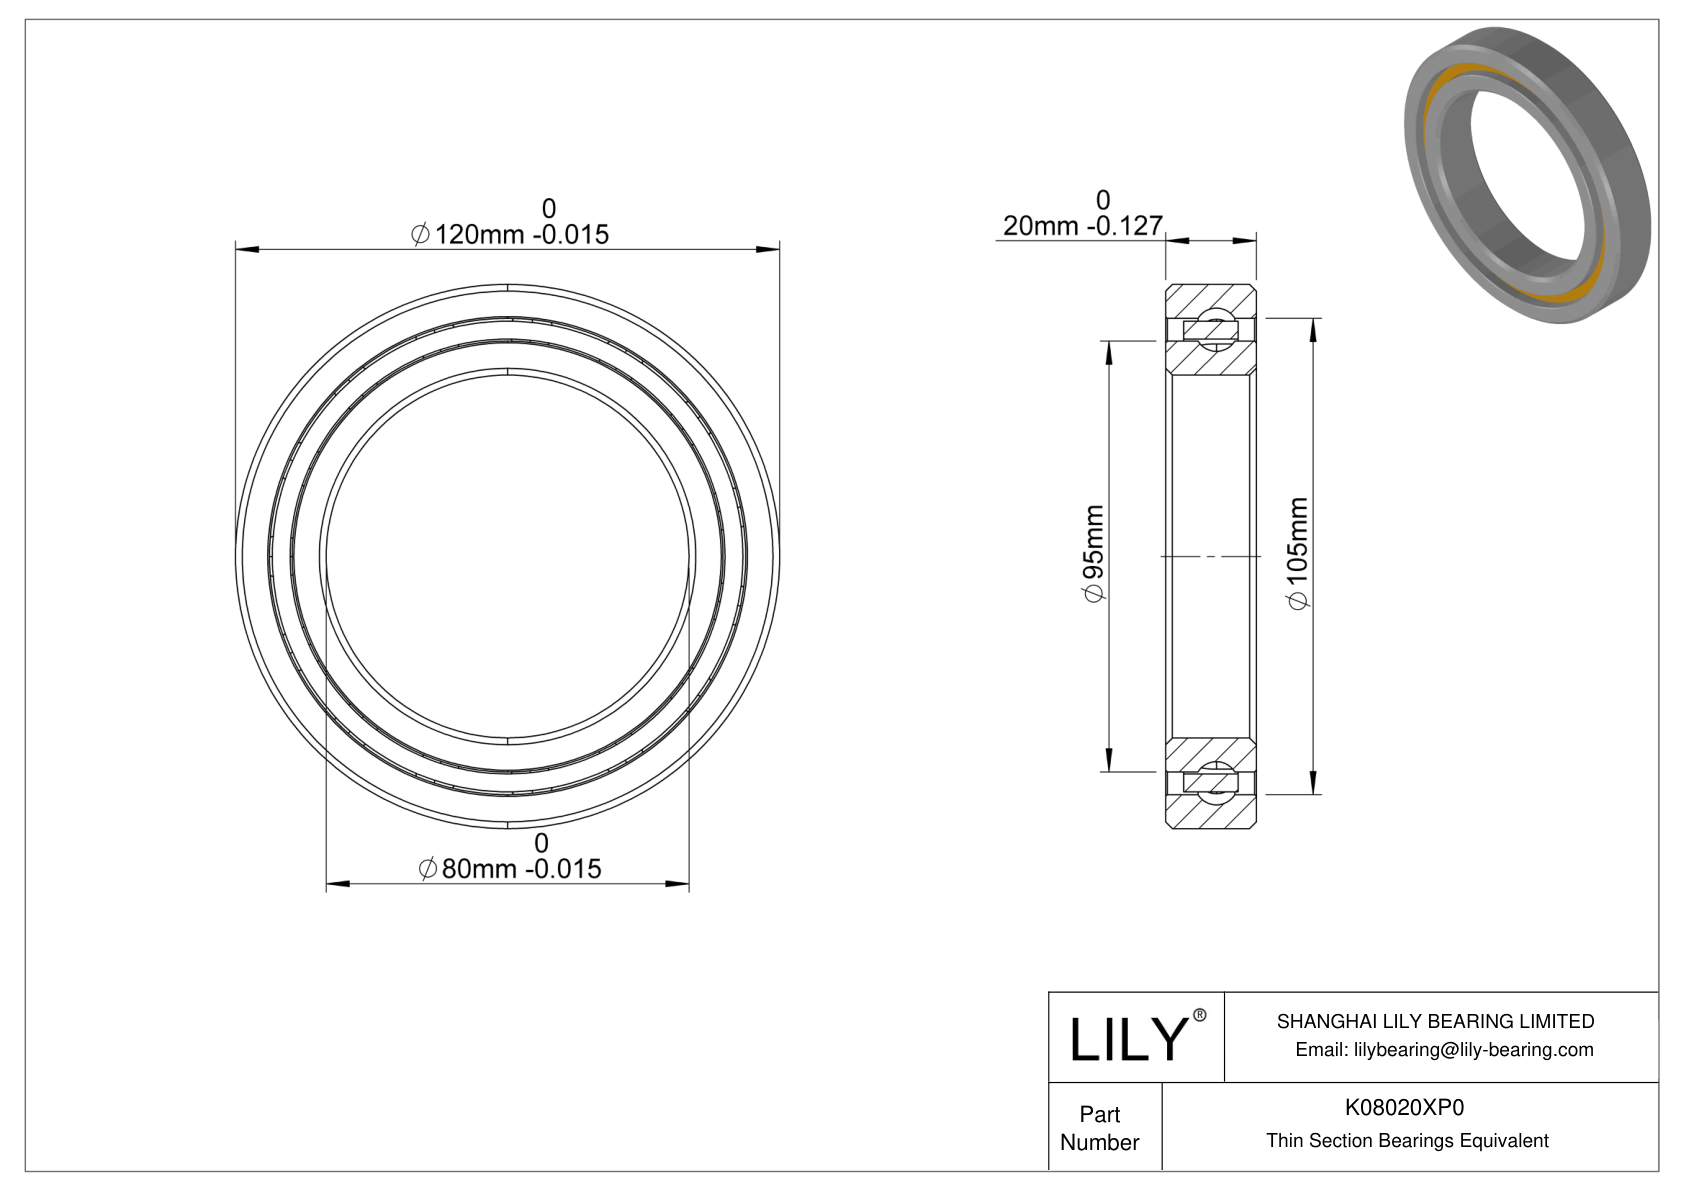 K08020XP0 Constant Section (CS) Bearings cad drawing